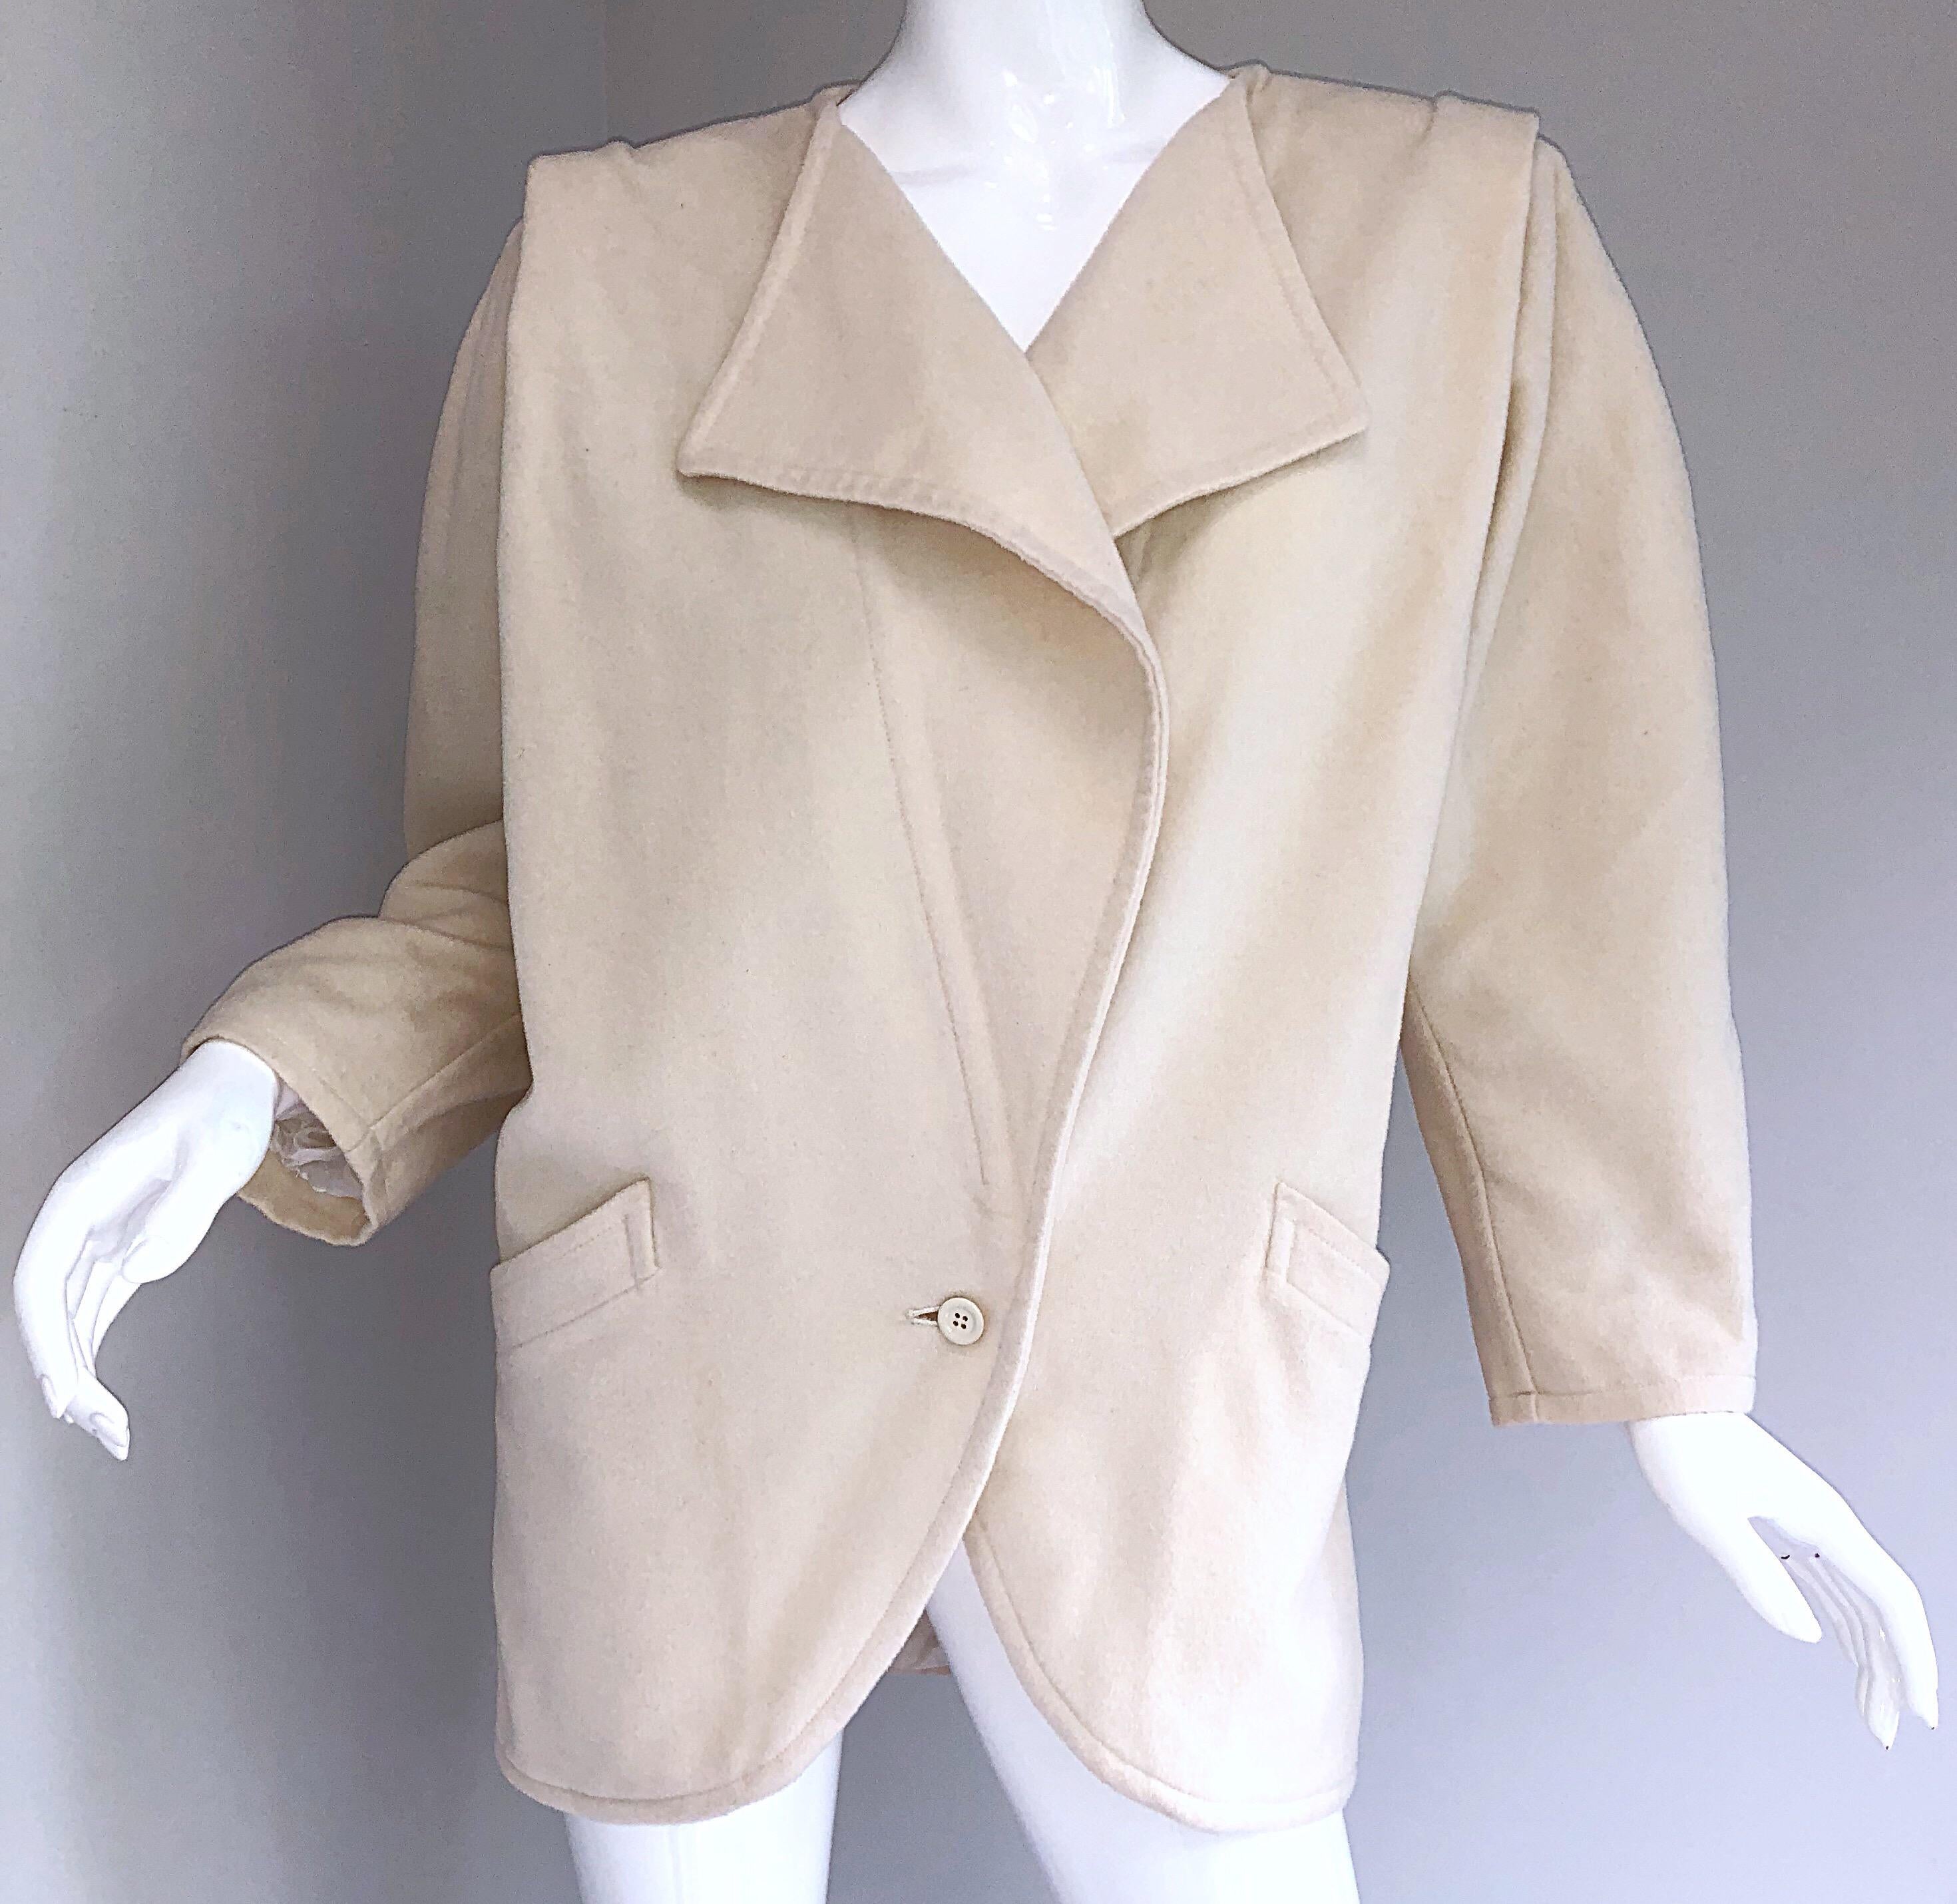 Fabulous Vintage Emanuel Ungaro 1980s Avant Garde Ivory Wool 80s Cocoon Jacket In Excellent Condition For Sale In San Diego, CA